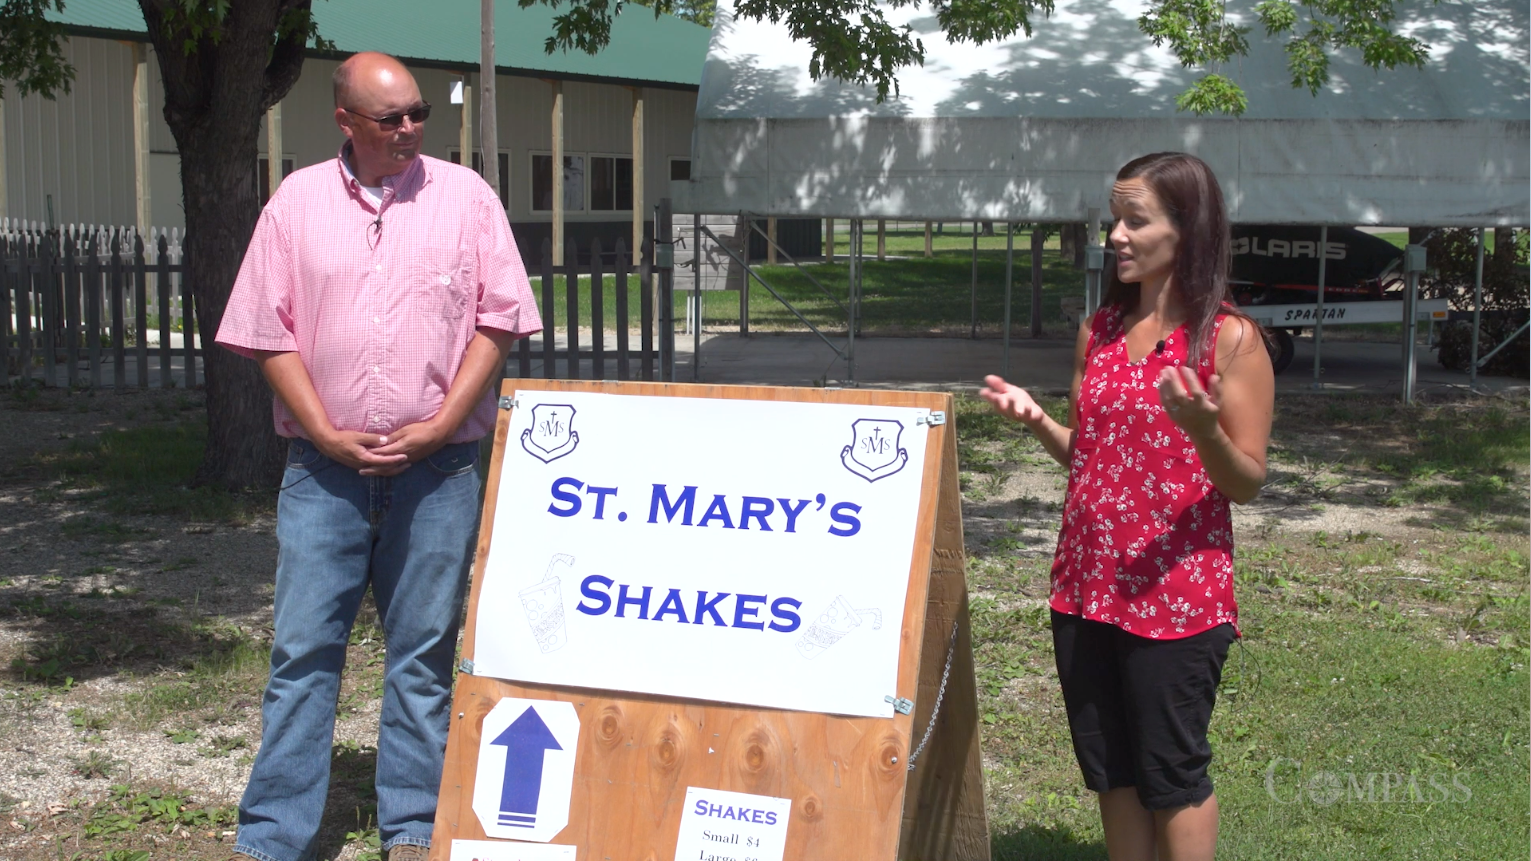 Ryan Sleiter and Tanya Fisher standing front of a board that says, "St. Mary's Shakes."